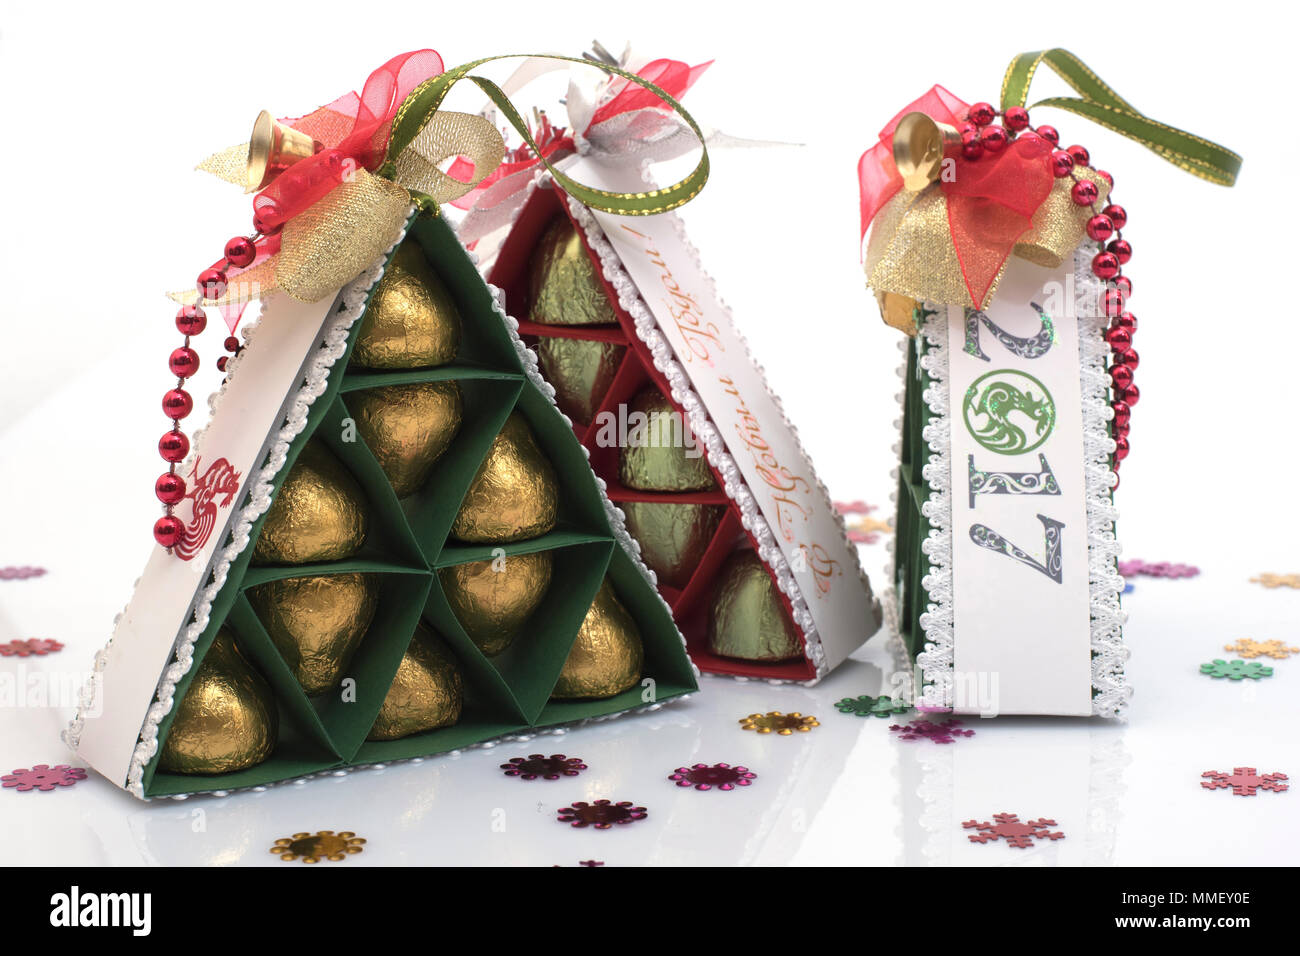 fir-trees handwork from paper with candies Stock Photo